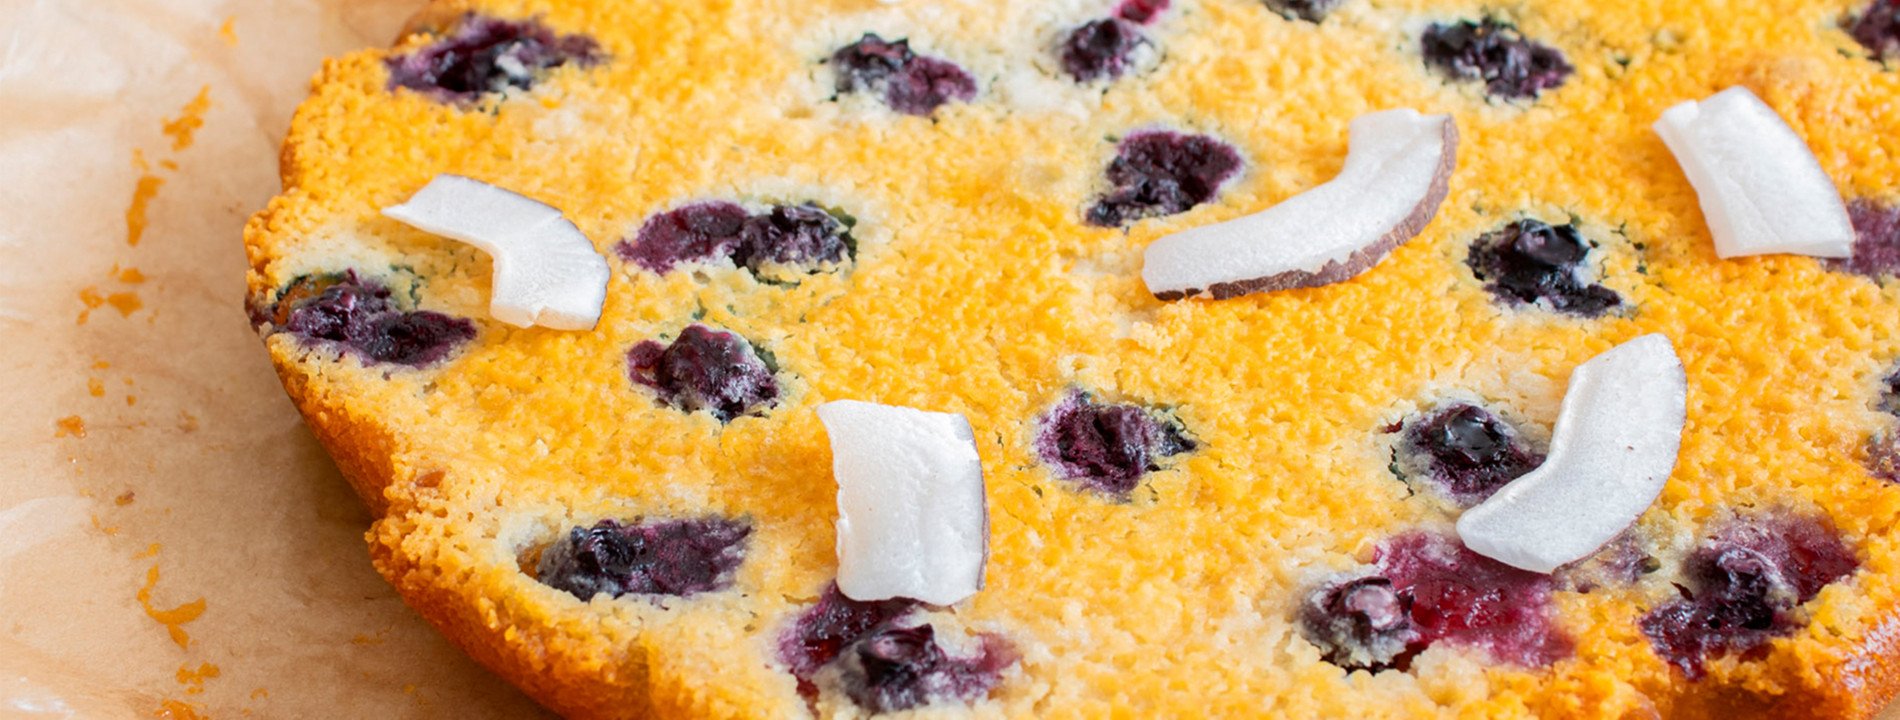 Coconut and Blueberries Cake